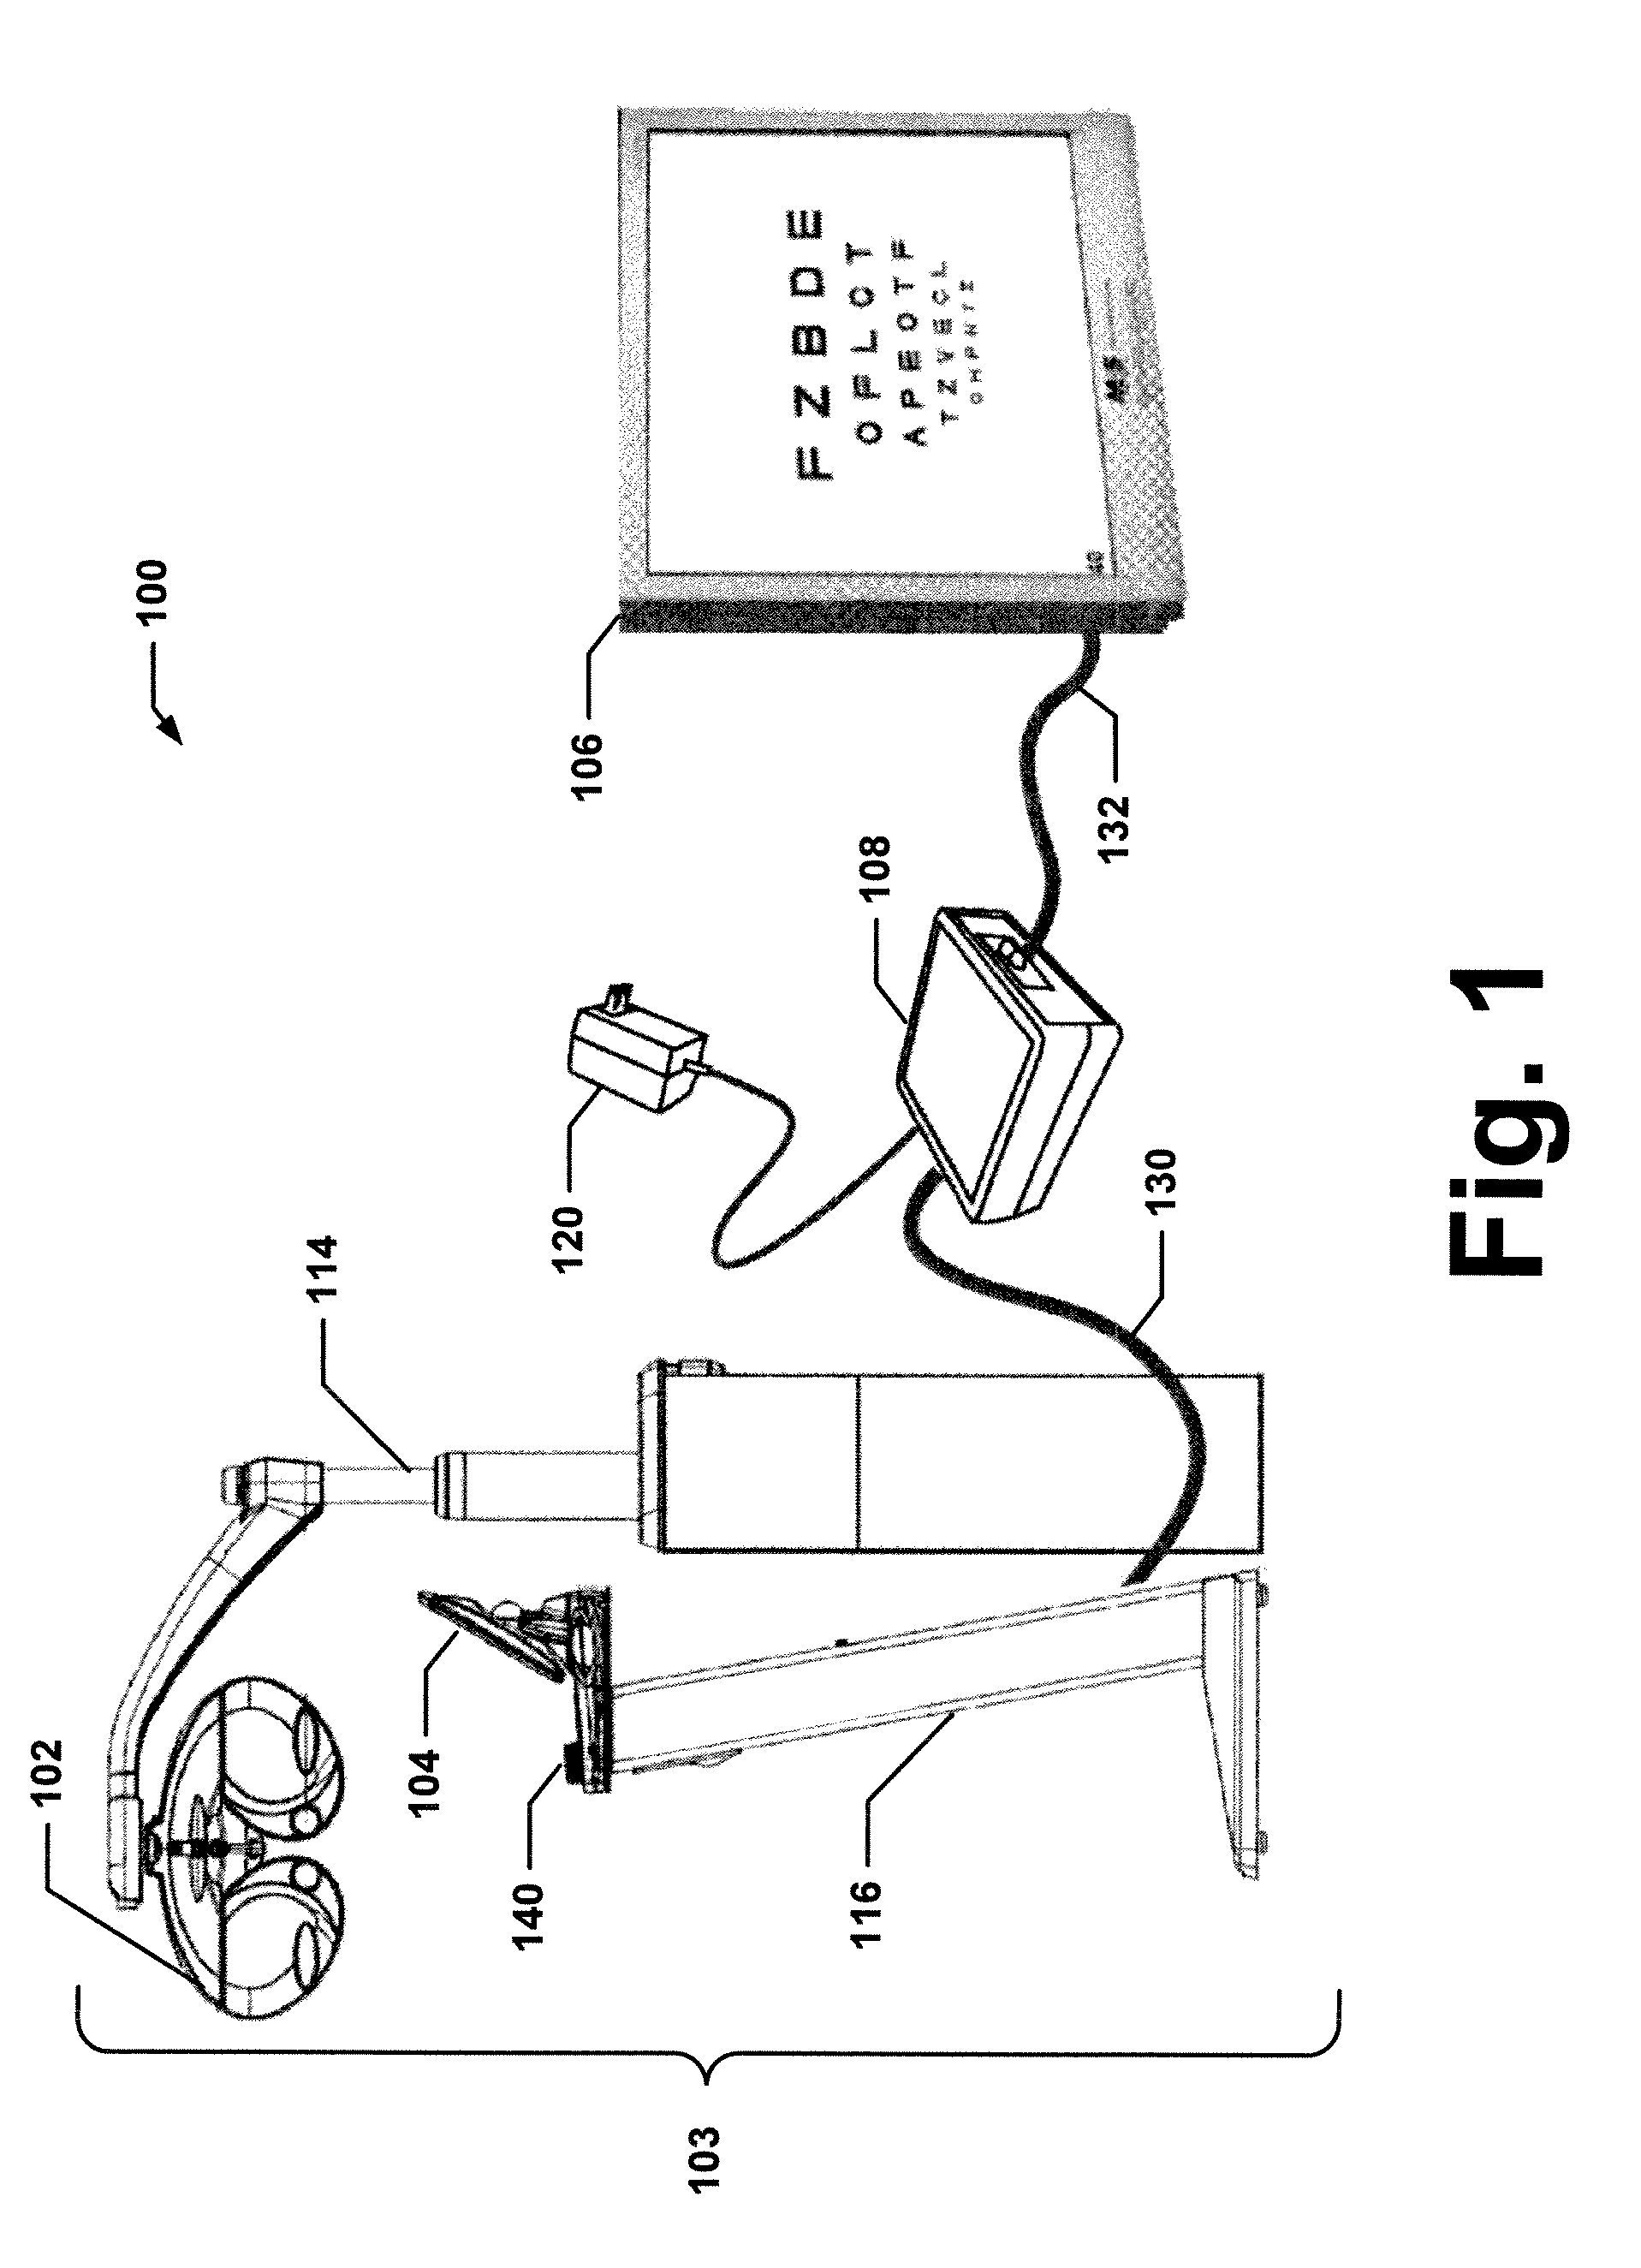 Ophthalmic examination system interface device